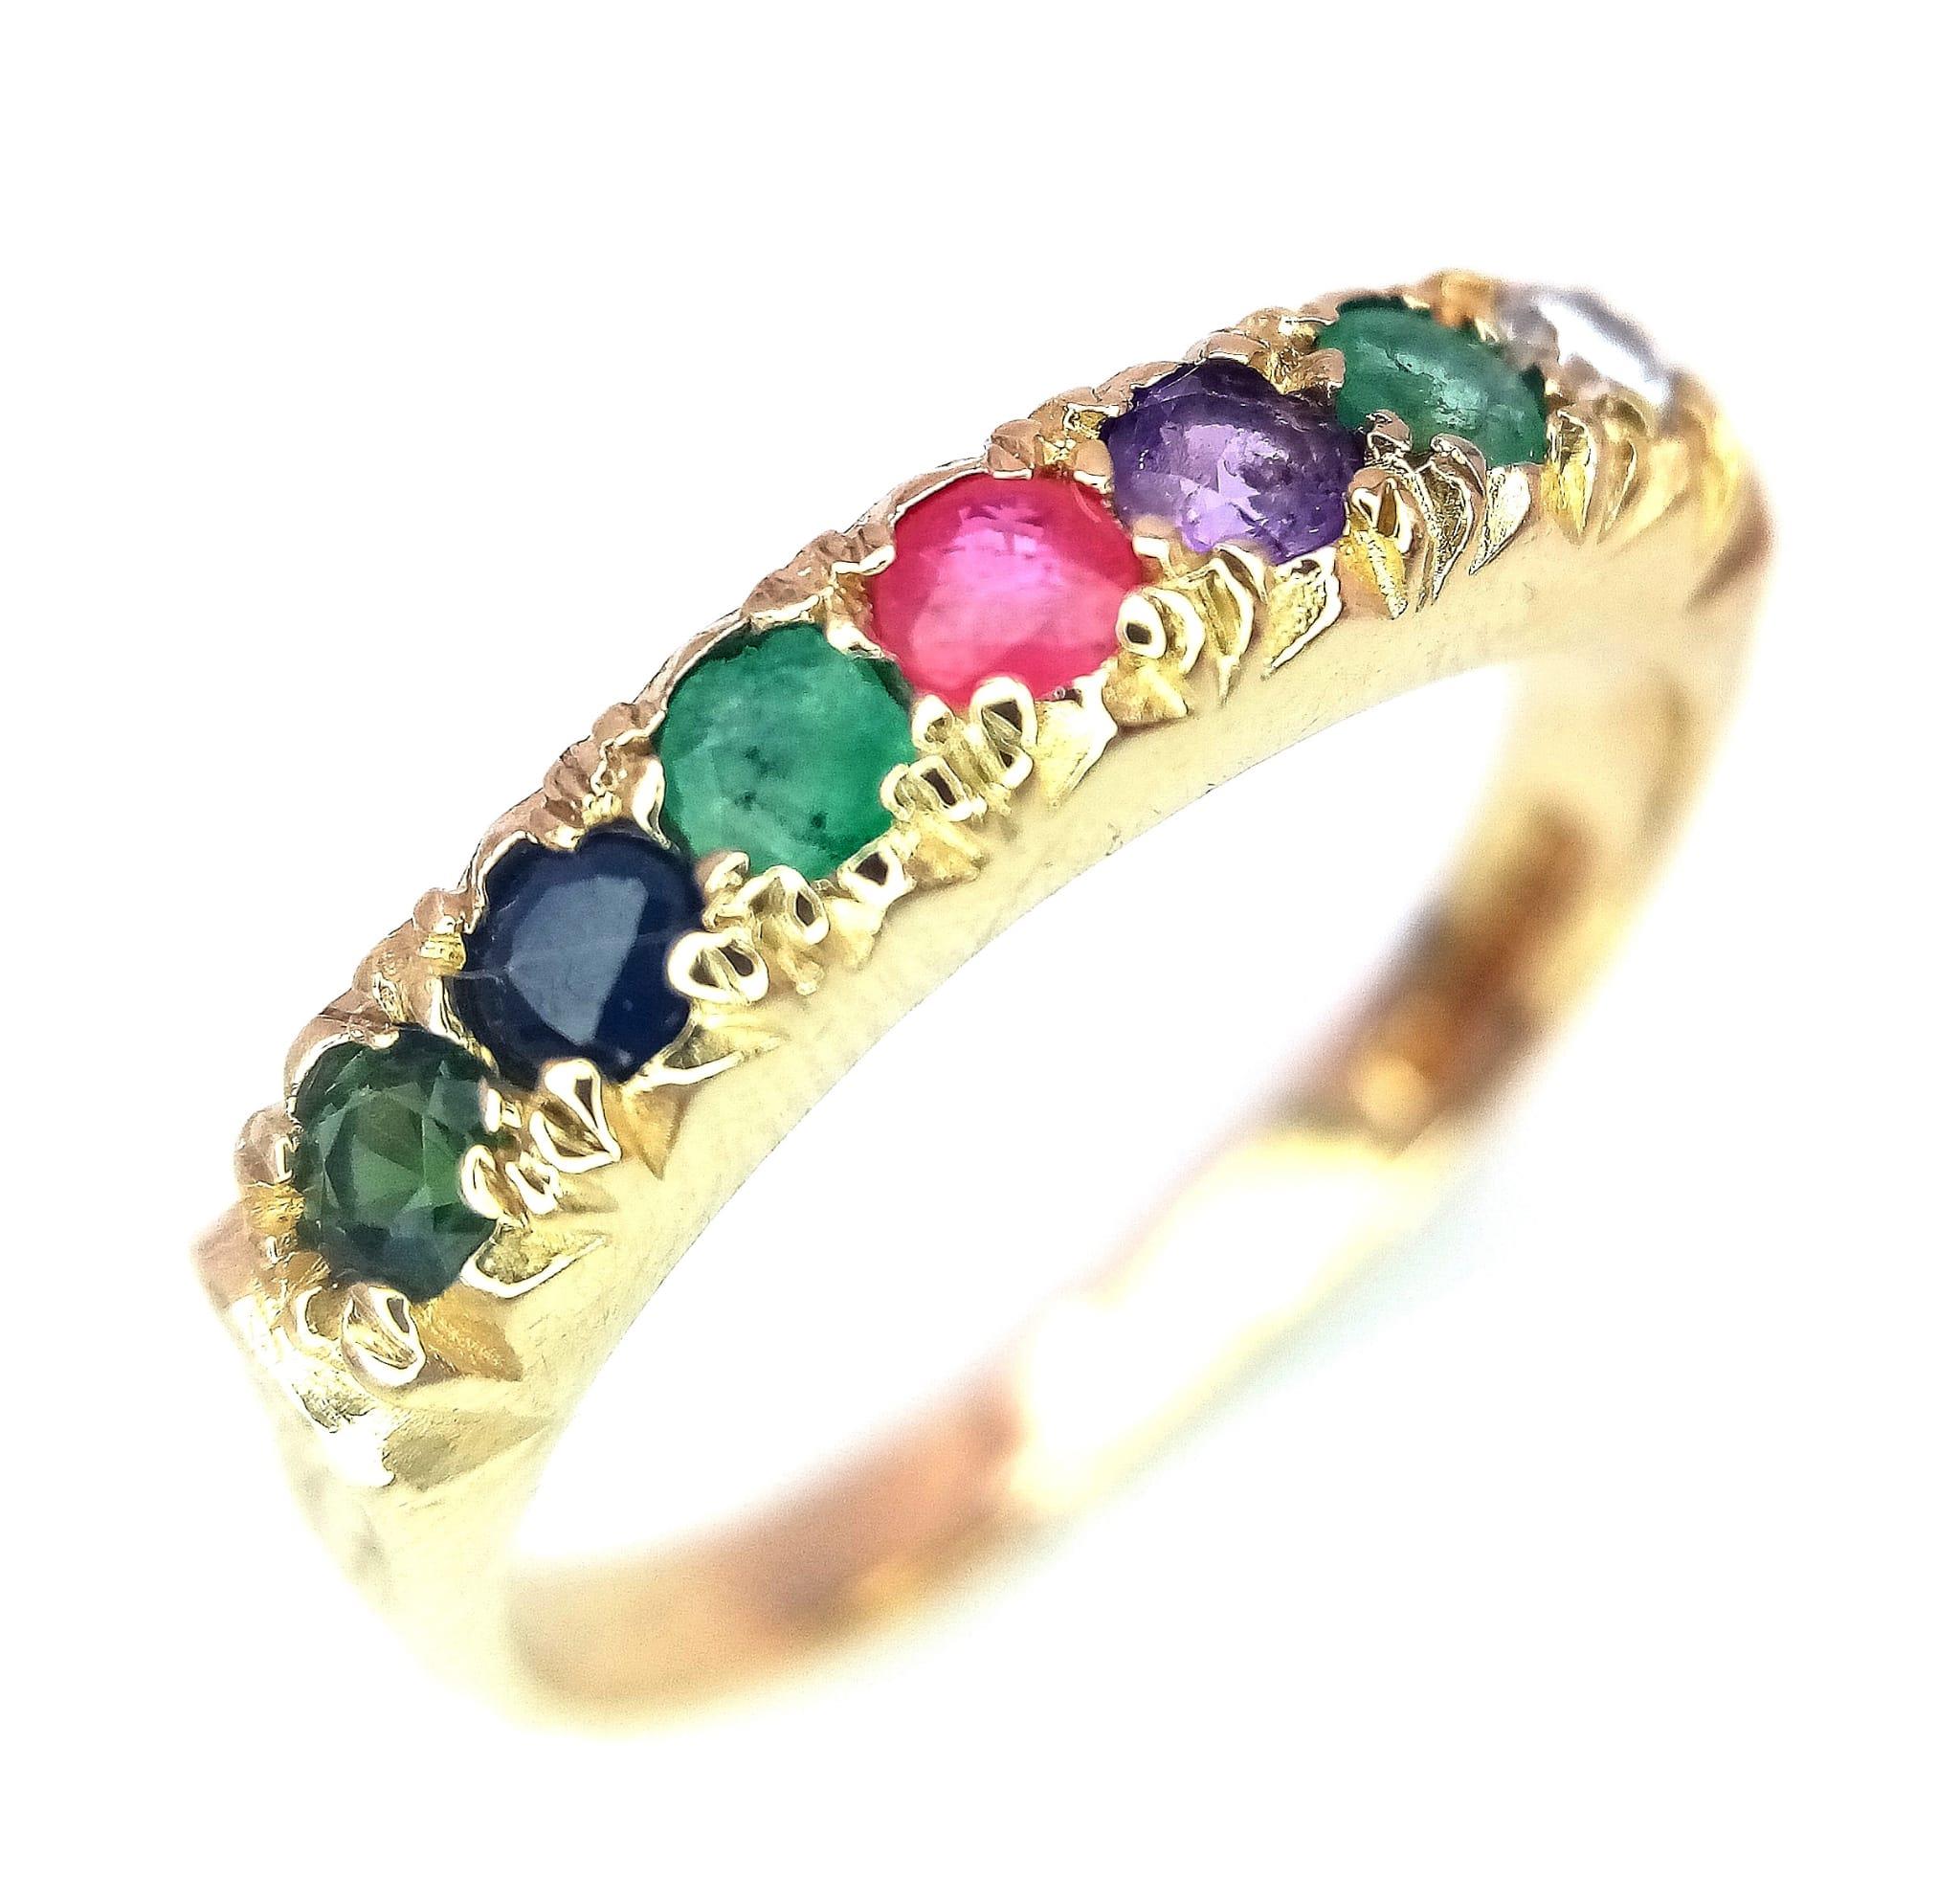 A PRETTY 9K YELLOW GOLD MULTI GEMSTONES SET DEAREST RING, WEIGHT 2.9G SIZE S - Image 3 of 11